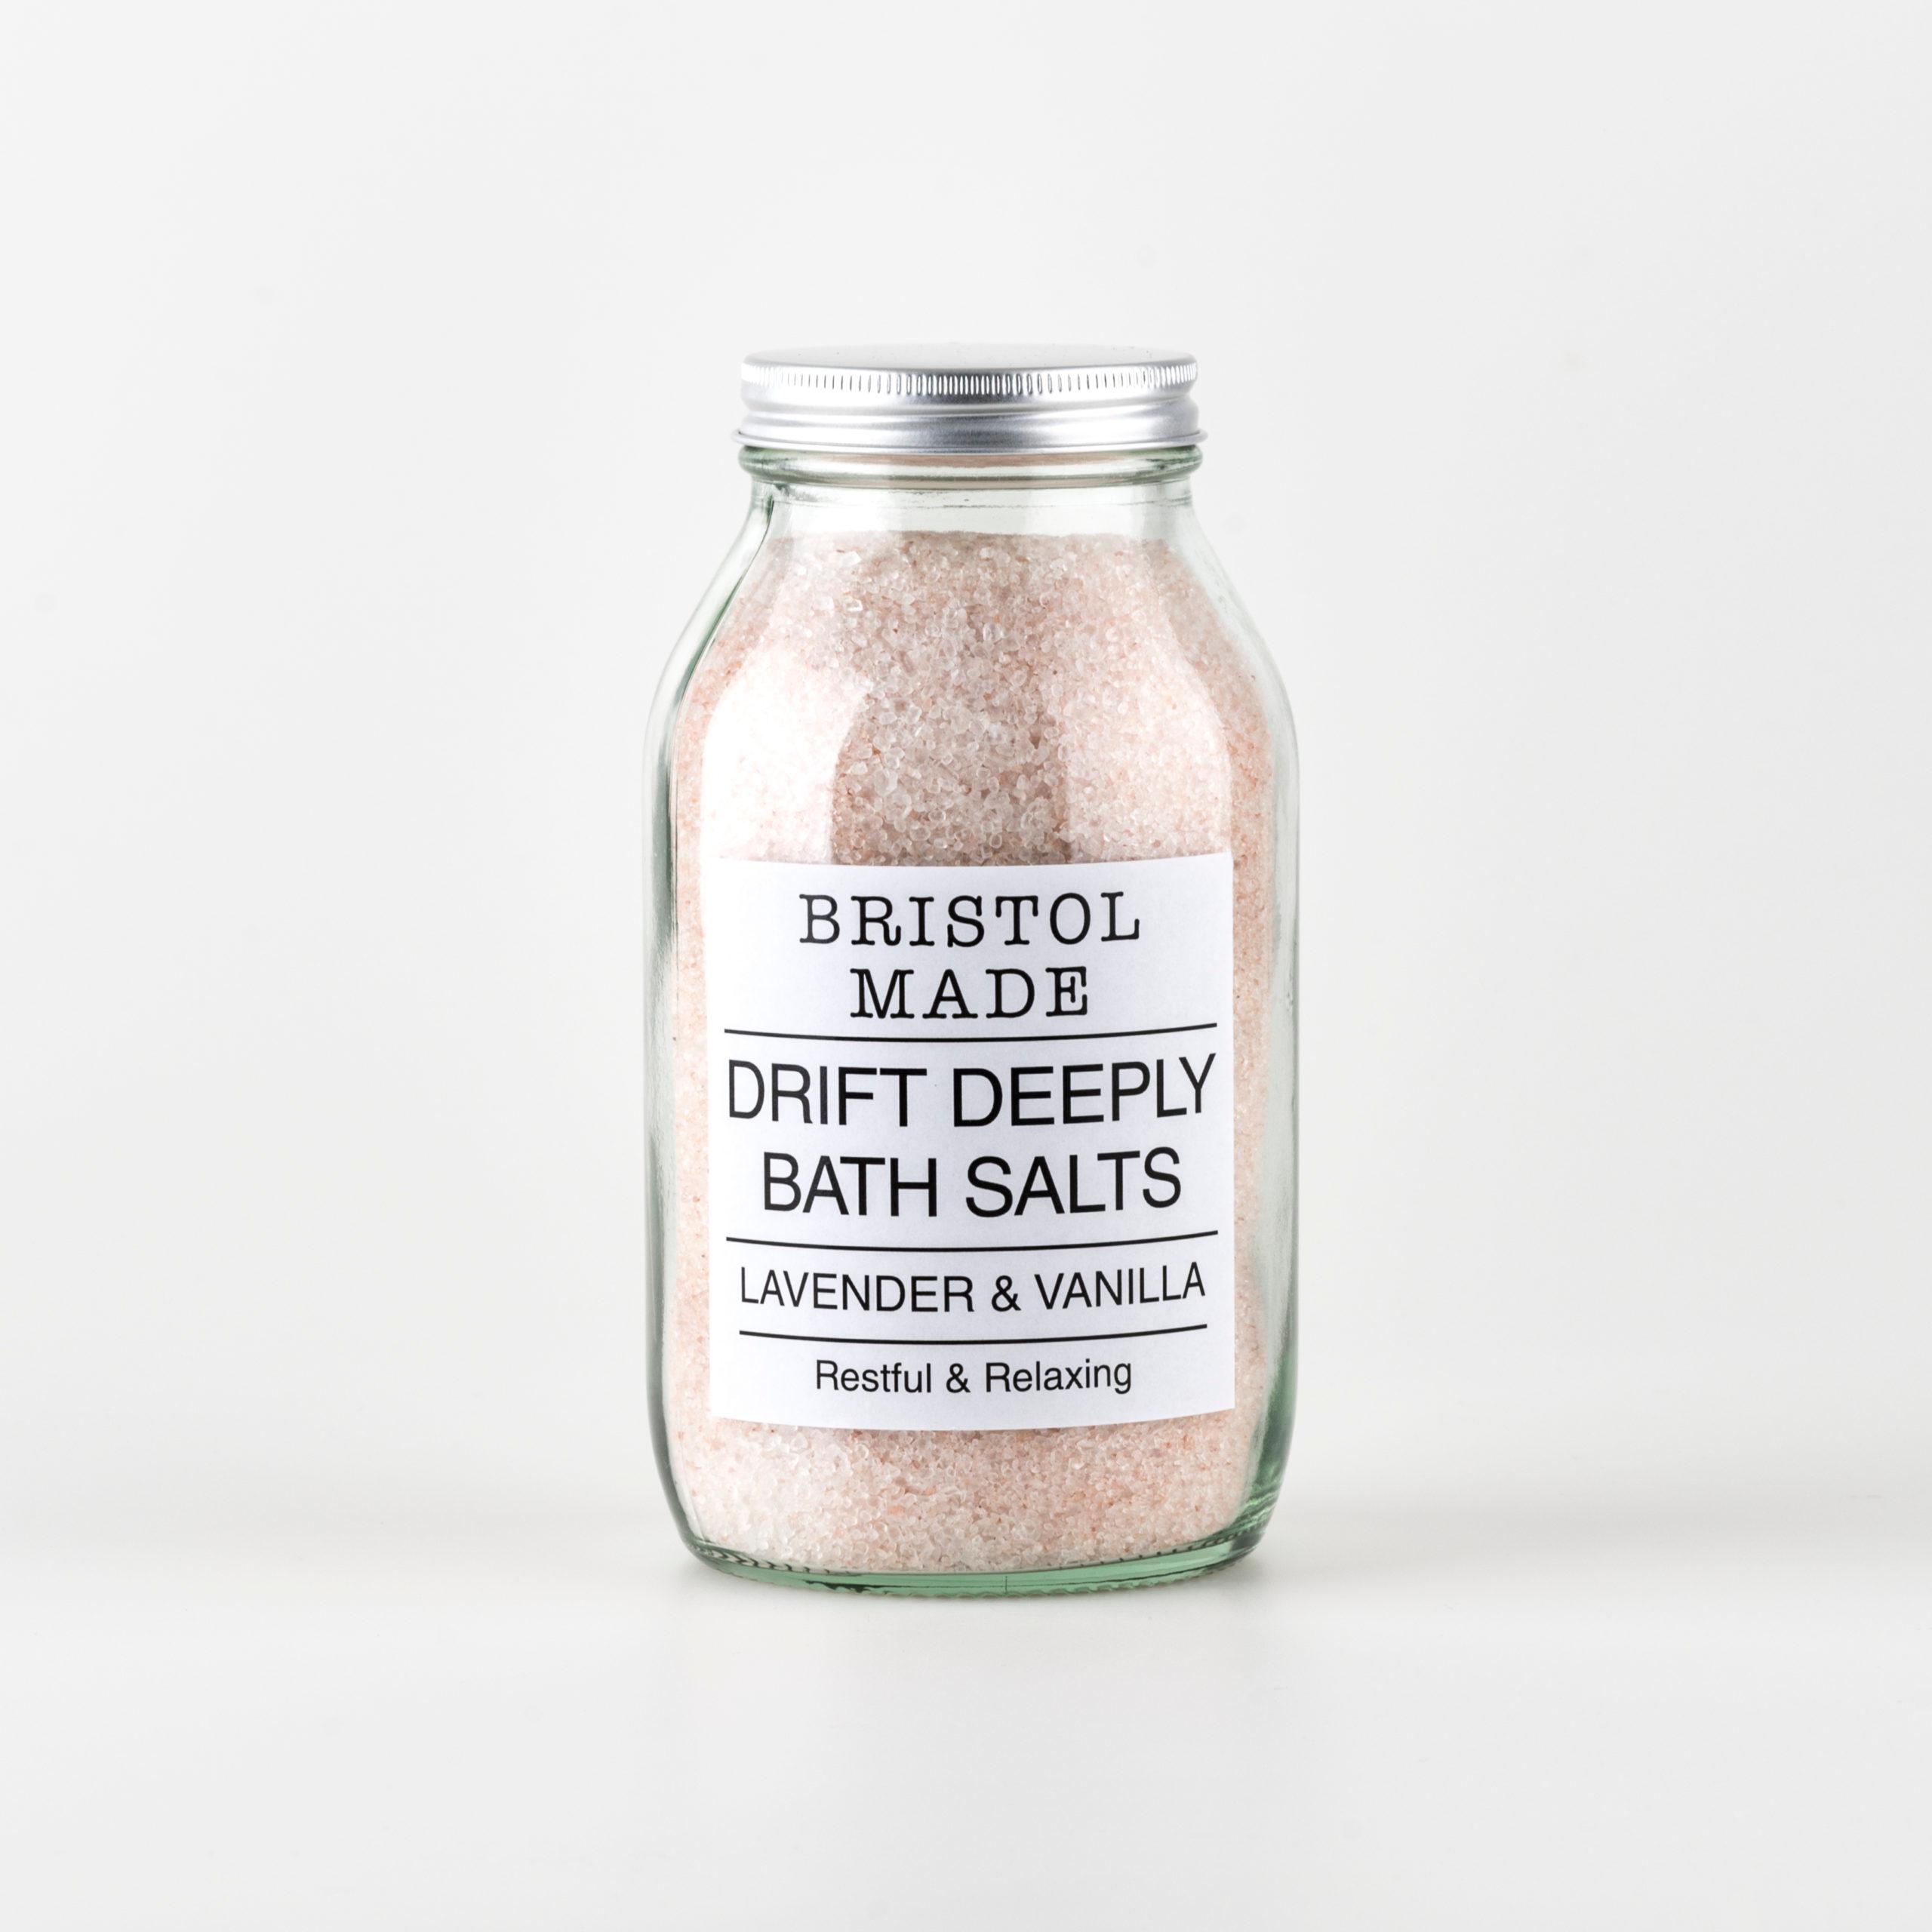 Product Bath Salts - Drift Deeply - Always Forever Green image